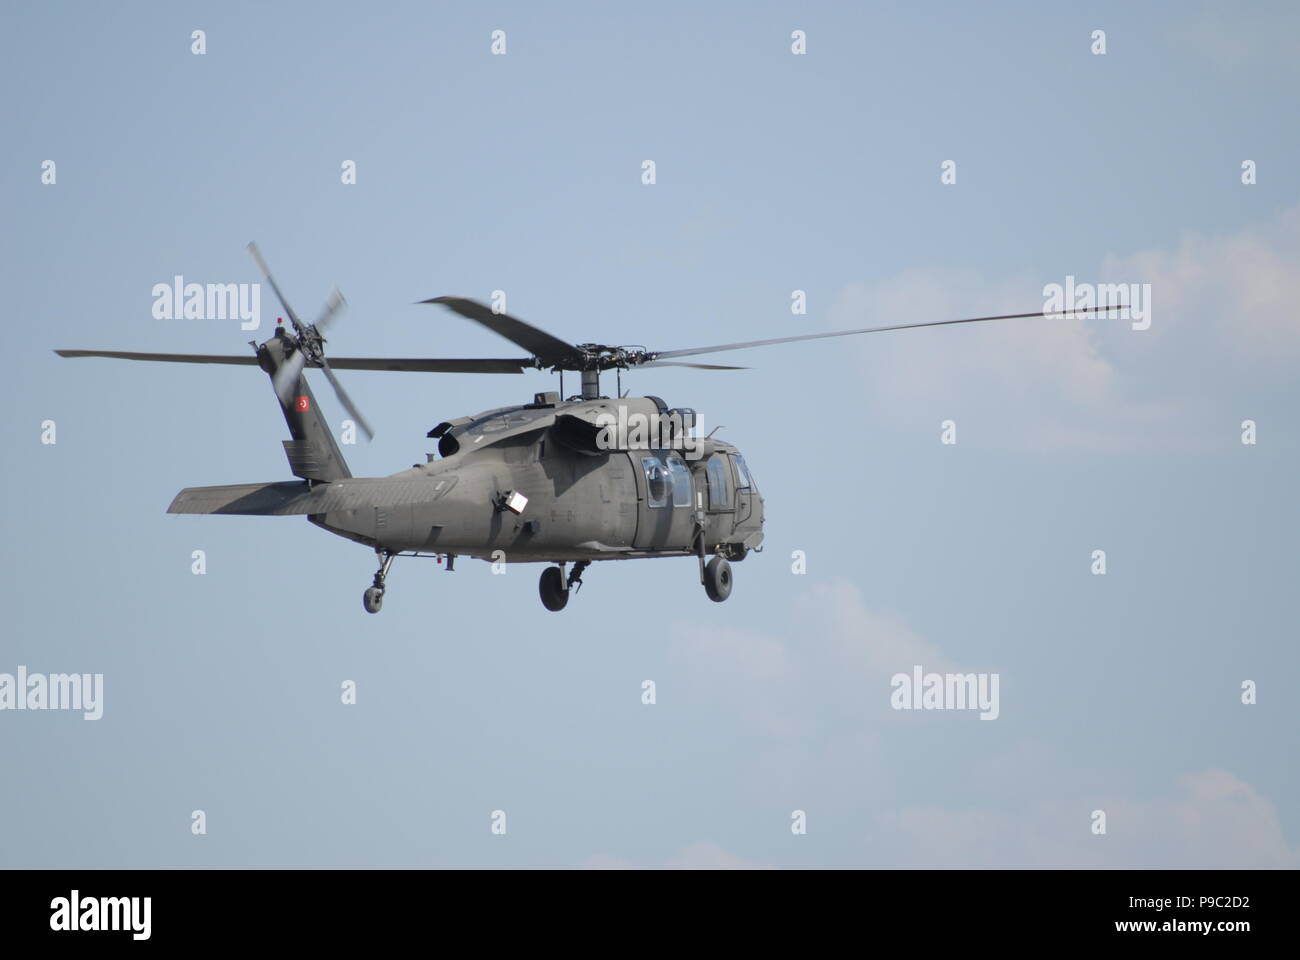 Sikorsky S-70 (UH-60) Black Hawk military utility helicopter of Turkish Air Force during the personel recovery task of the Anatolian Phoenix CSAR Exer Stock Photo